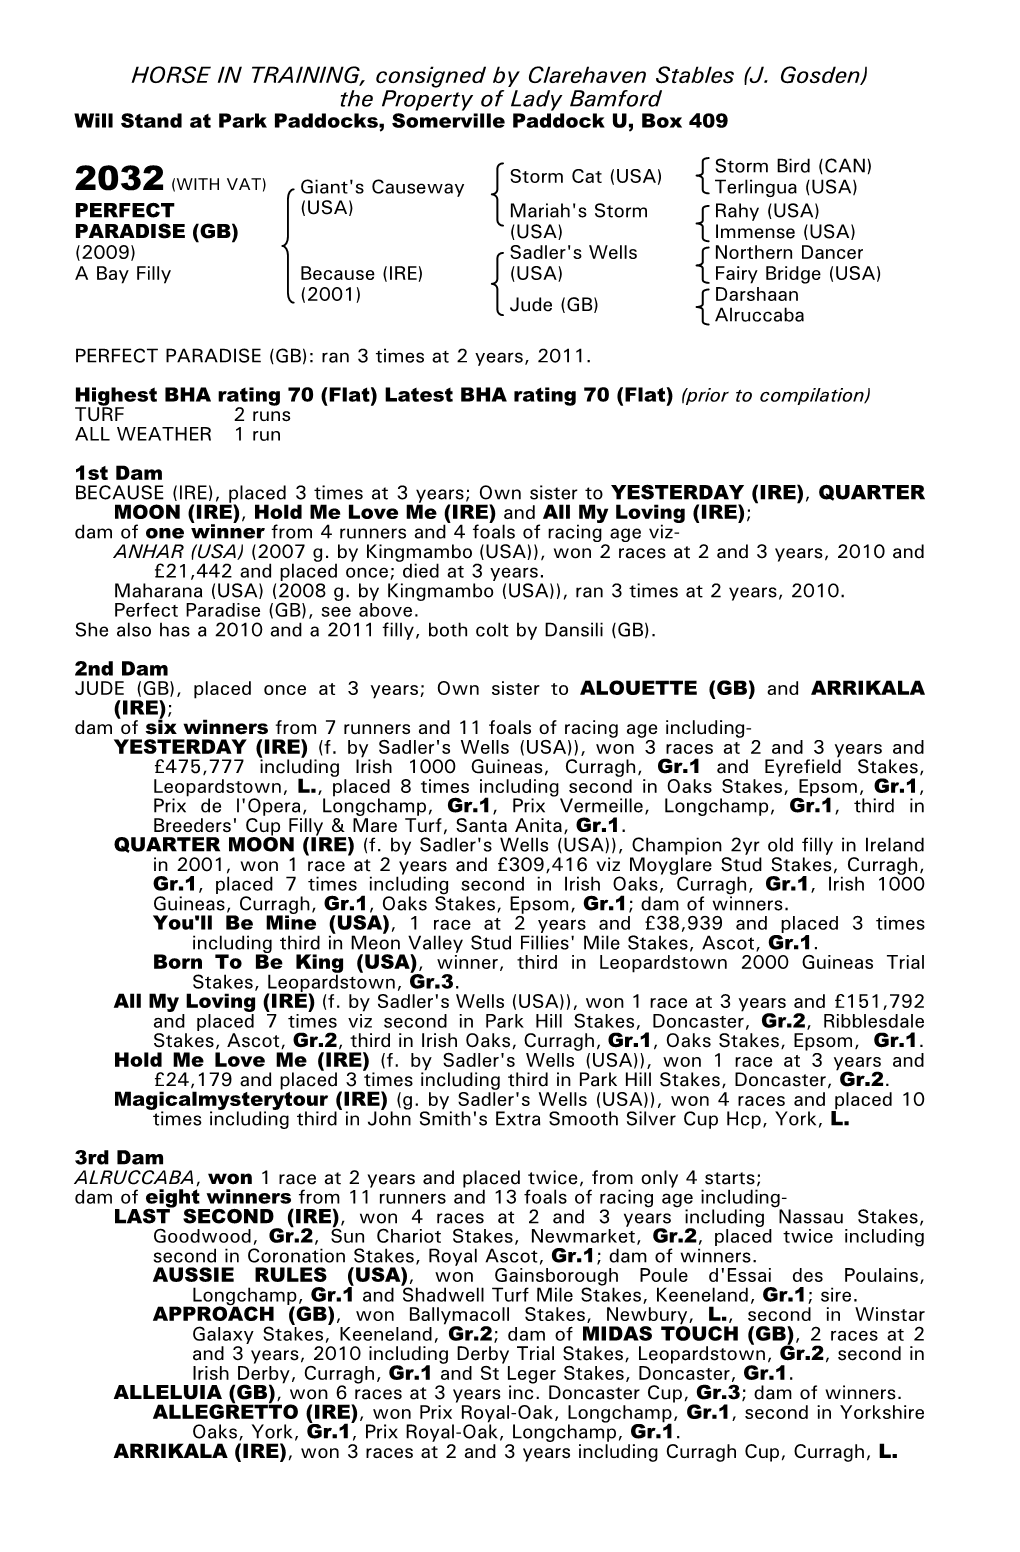 HORSE in TRAINING, Consigned by Clarehaven Stables (J. Gosden) the Property of Lady Bamford Will Stand at Park Paddocks, Somerville Paddock U, Box 409